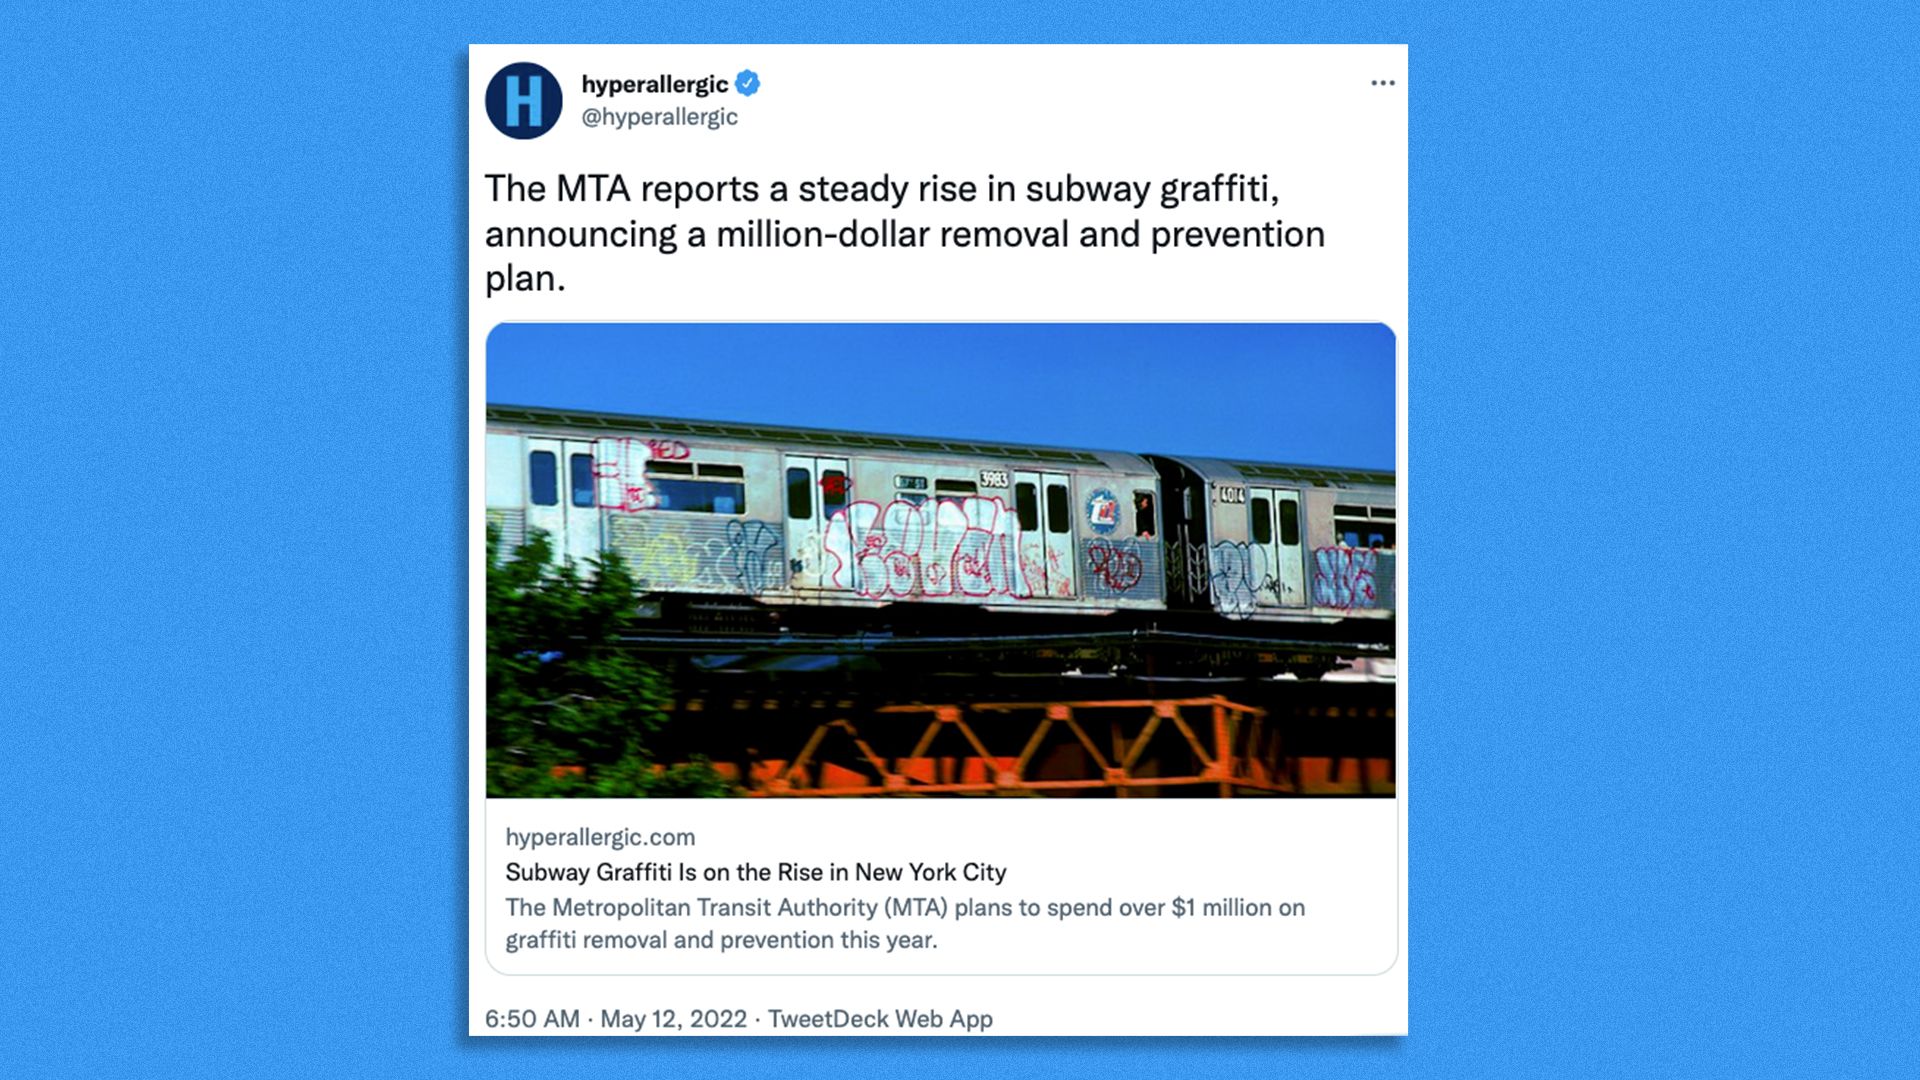 A tweet of a subway car covered in graffiti